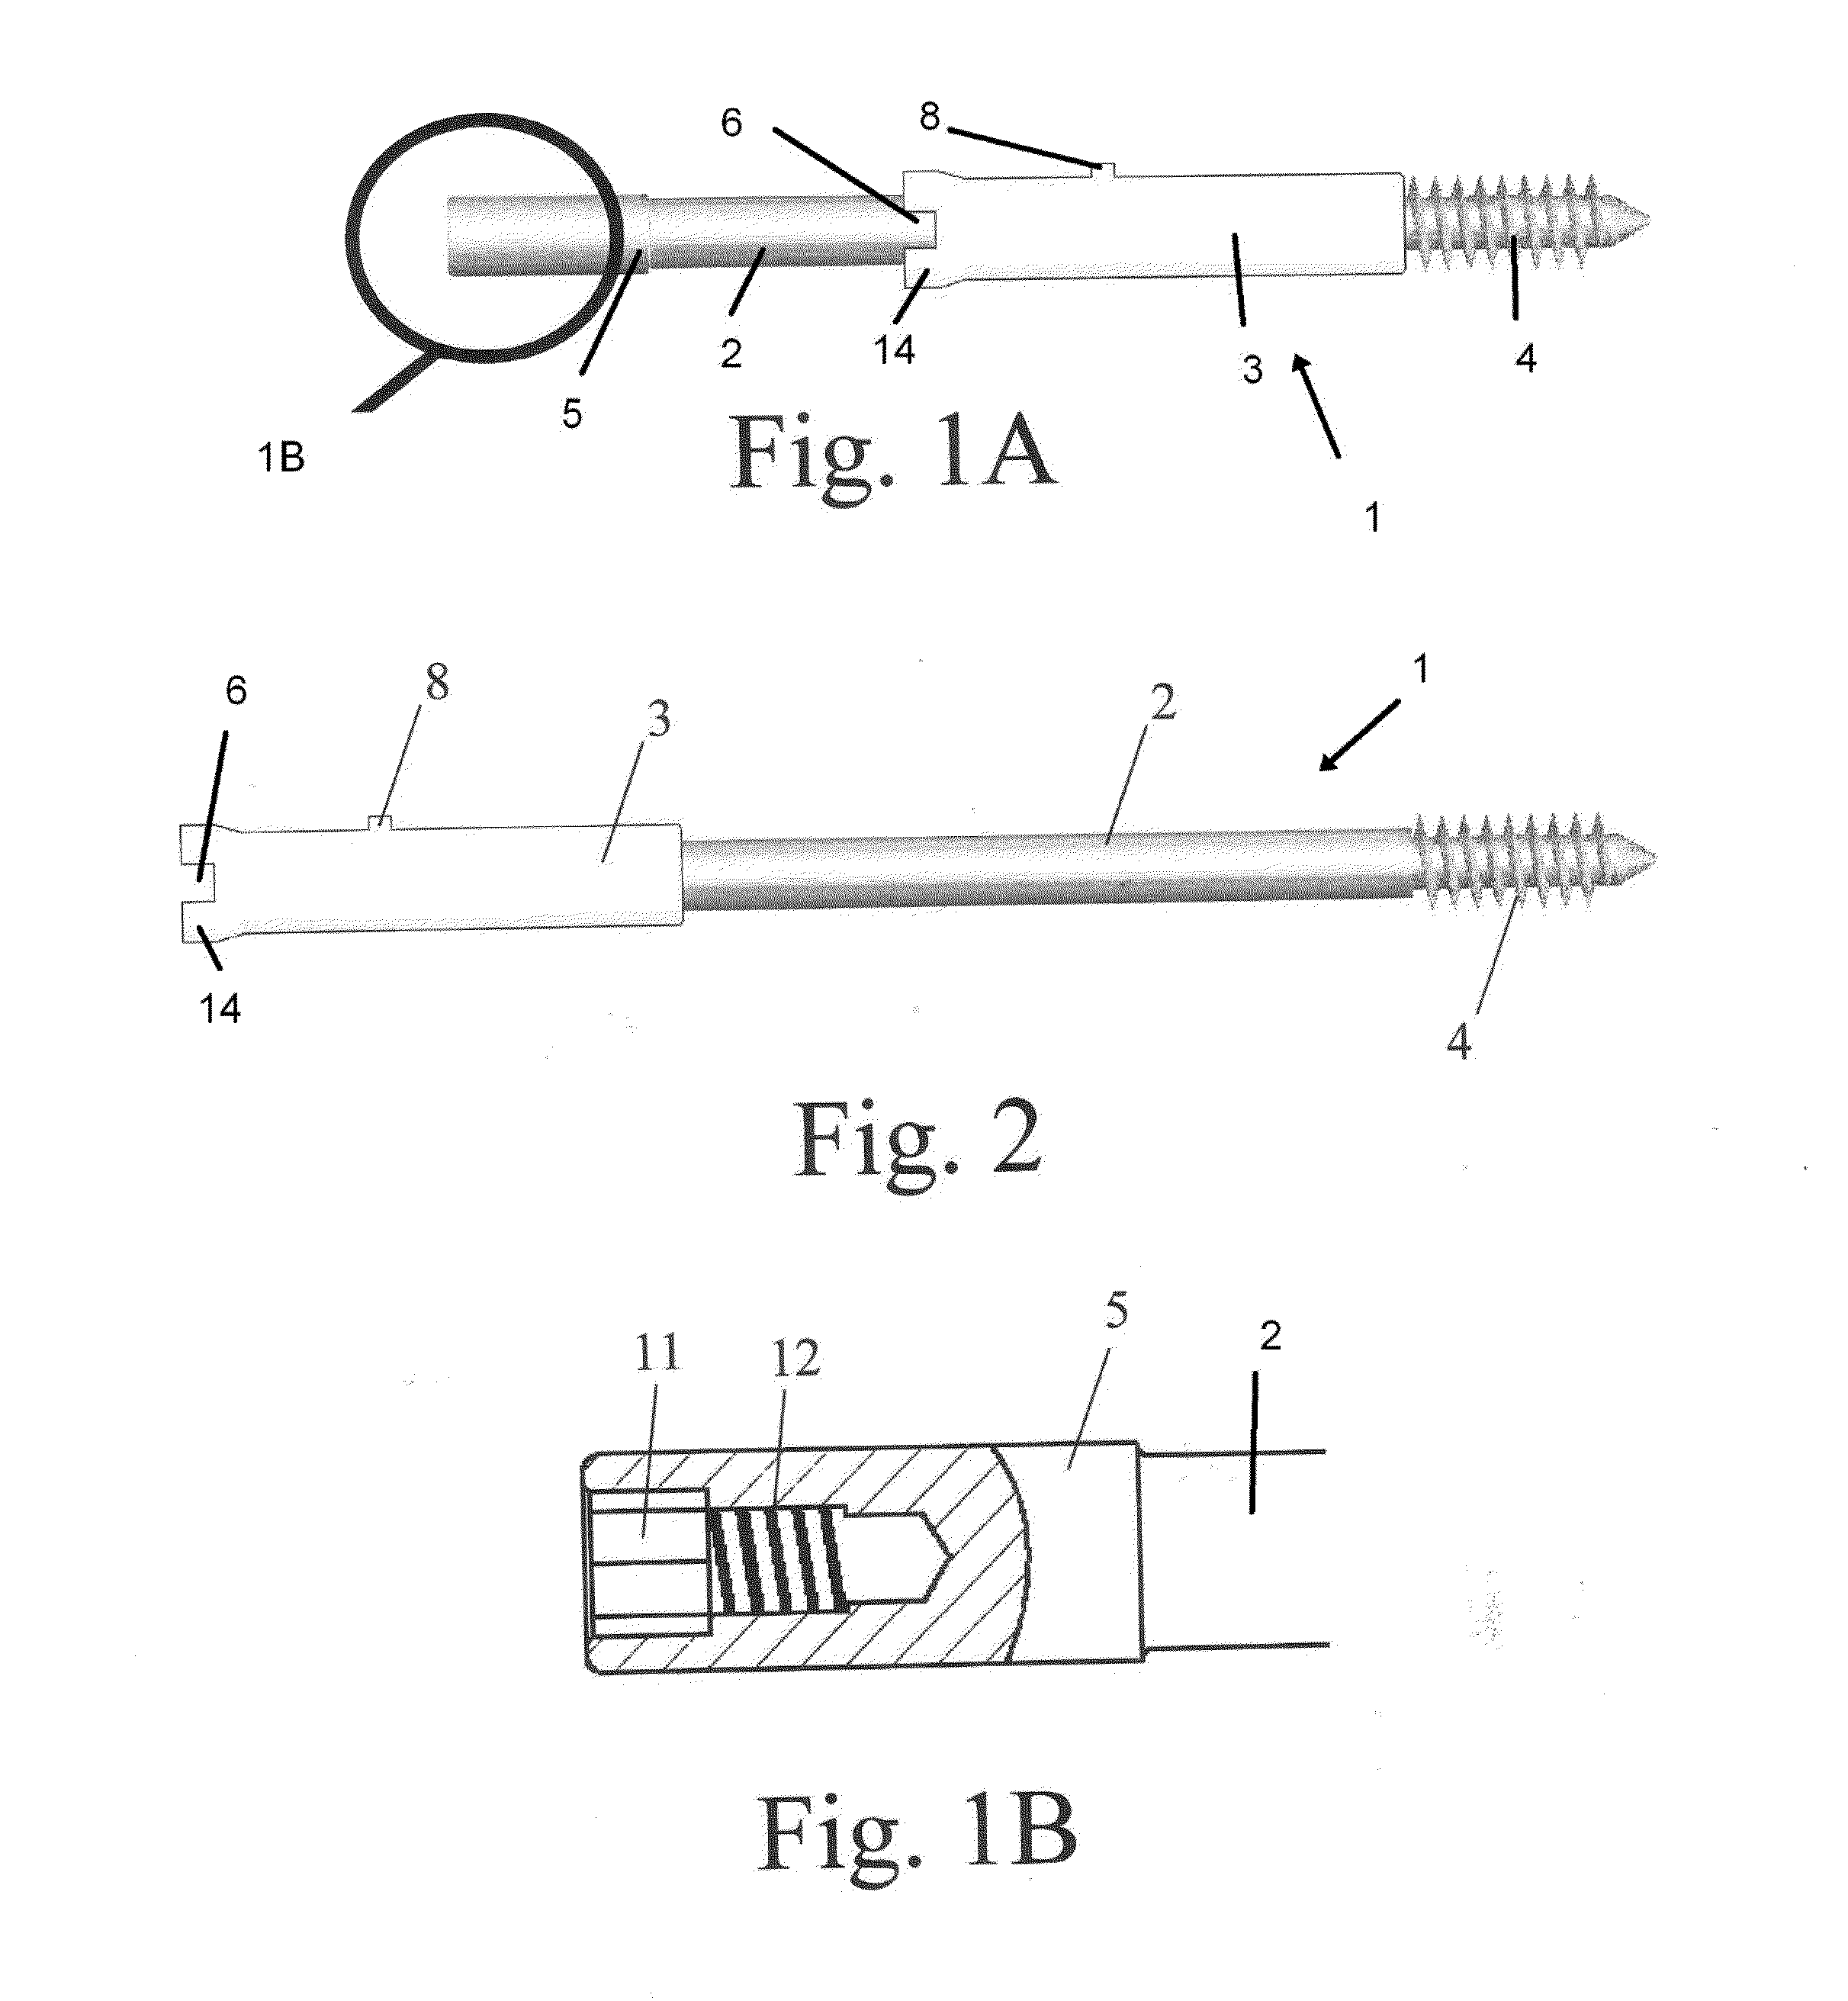 Method for connecting fractured bone